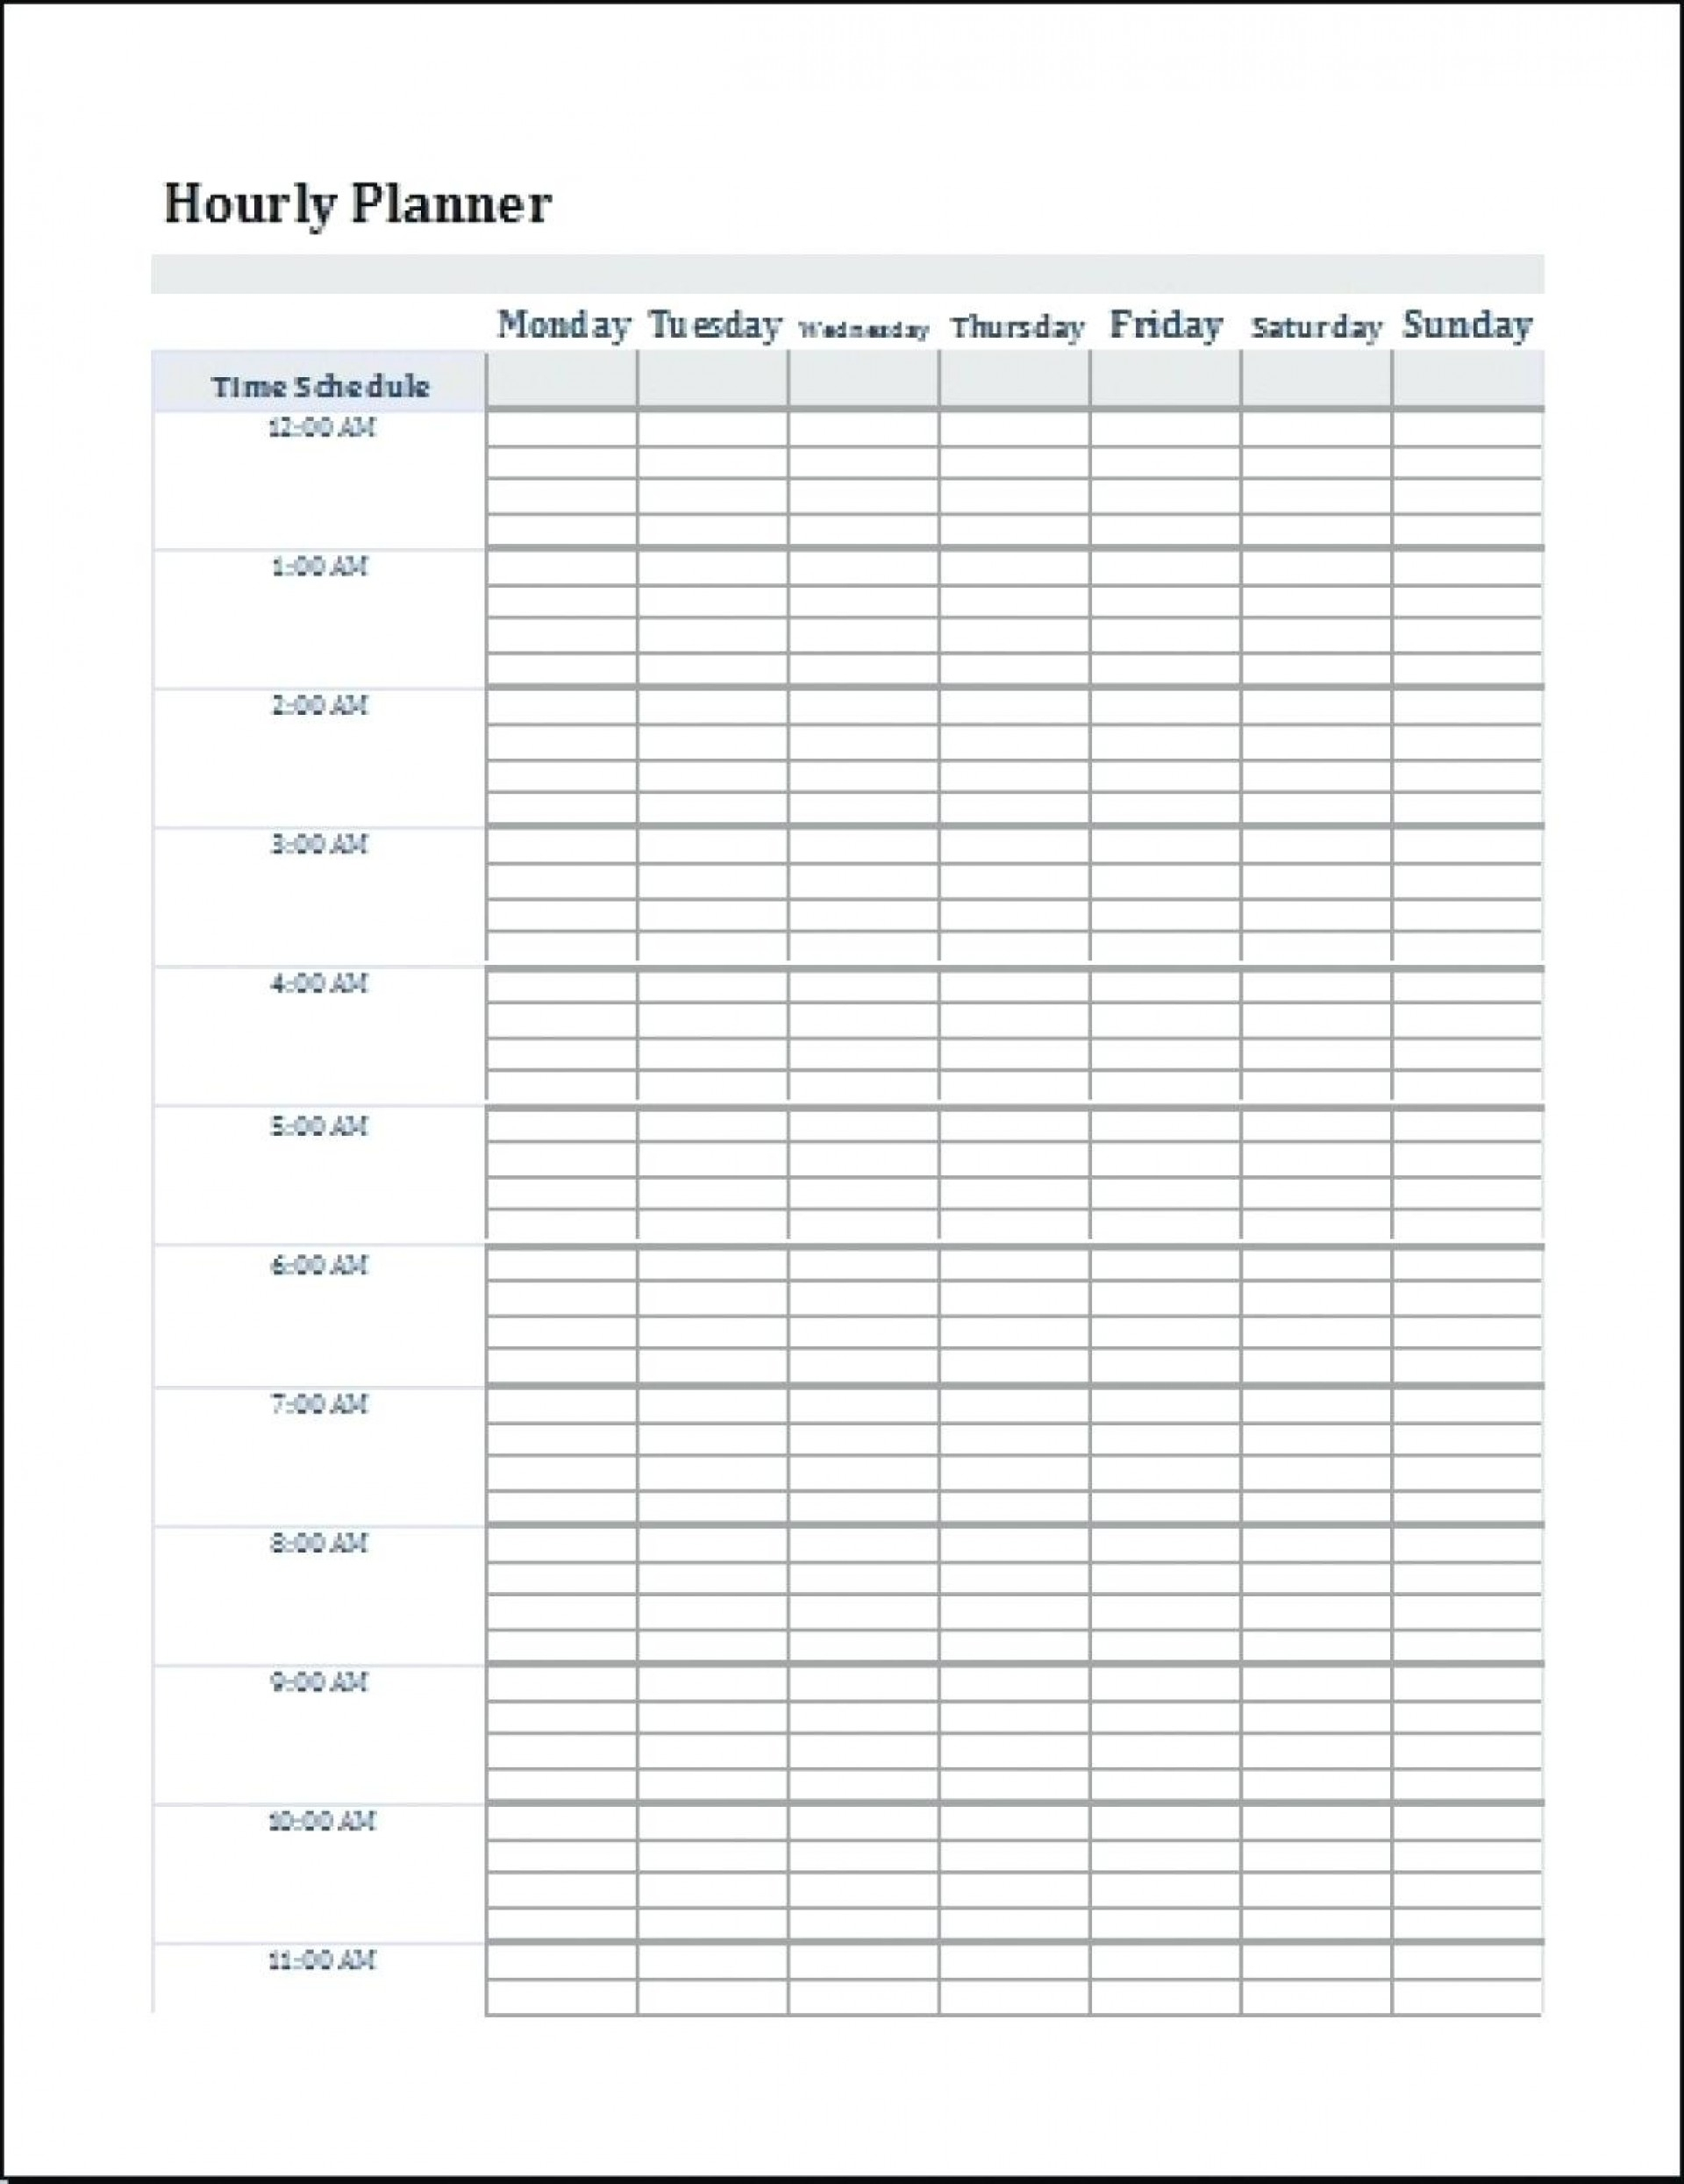 010 Template Ideas Weekly Hourly Schedule Calendar Excel pertaining to Printable Hourly Weekly Calendar